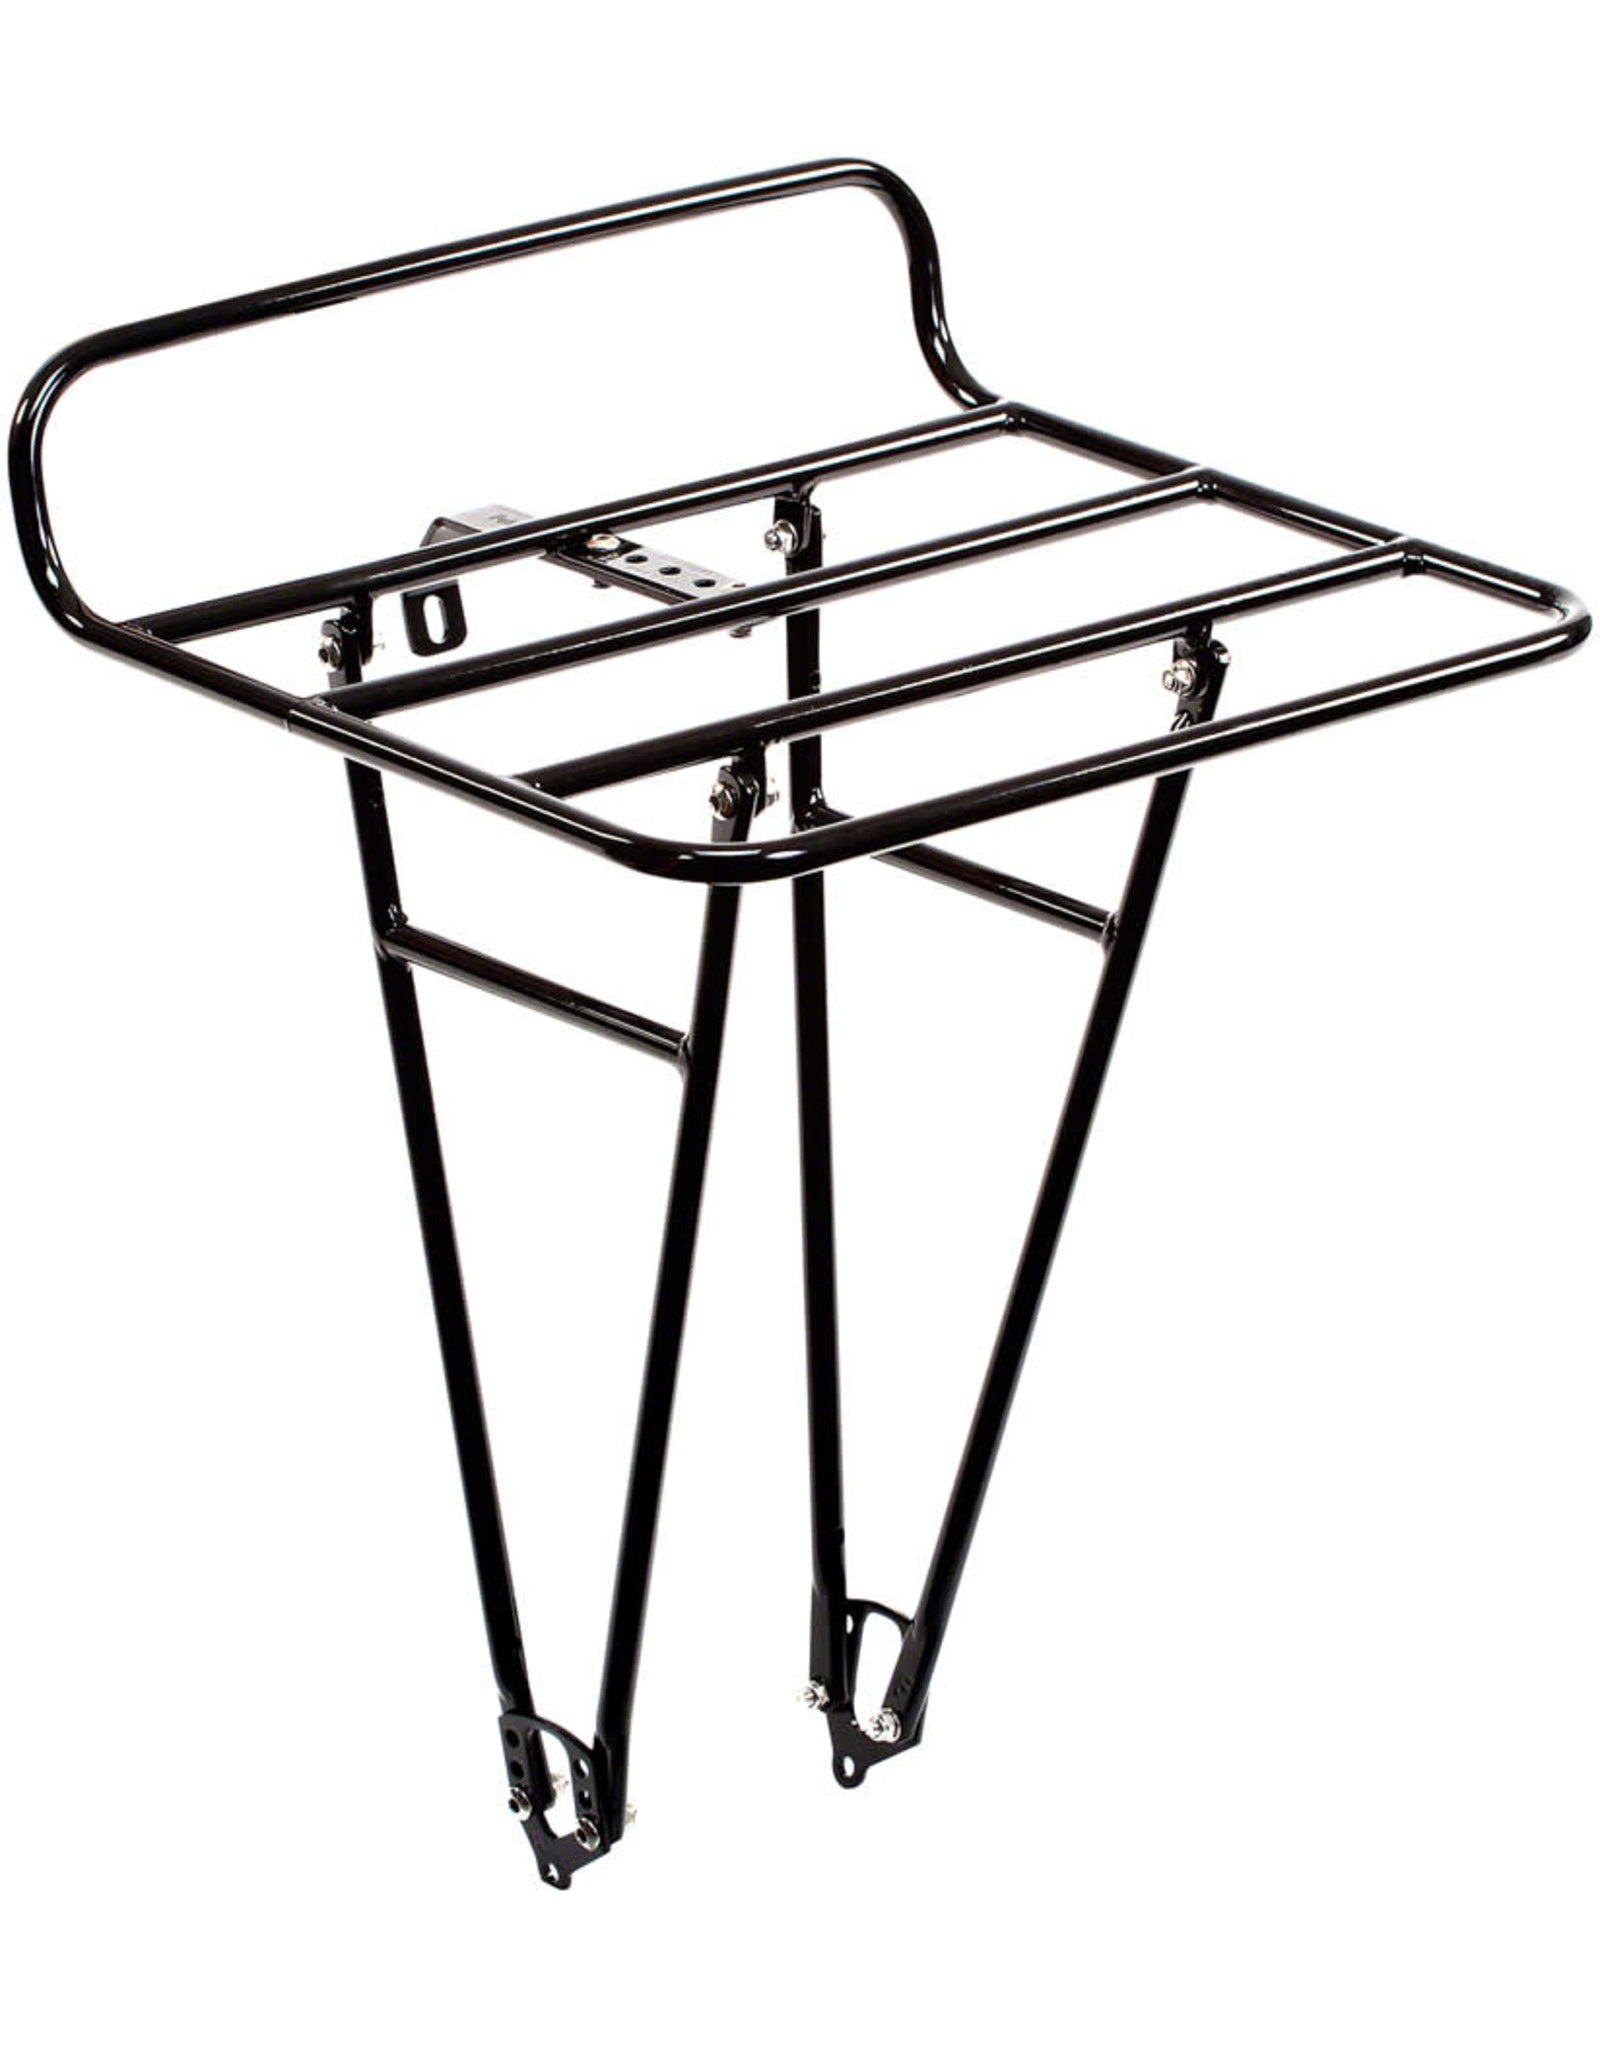 Pelago Bicycles Pelago Commuter Front Rack: Large, Black Stainless Steel